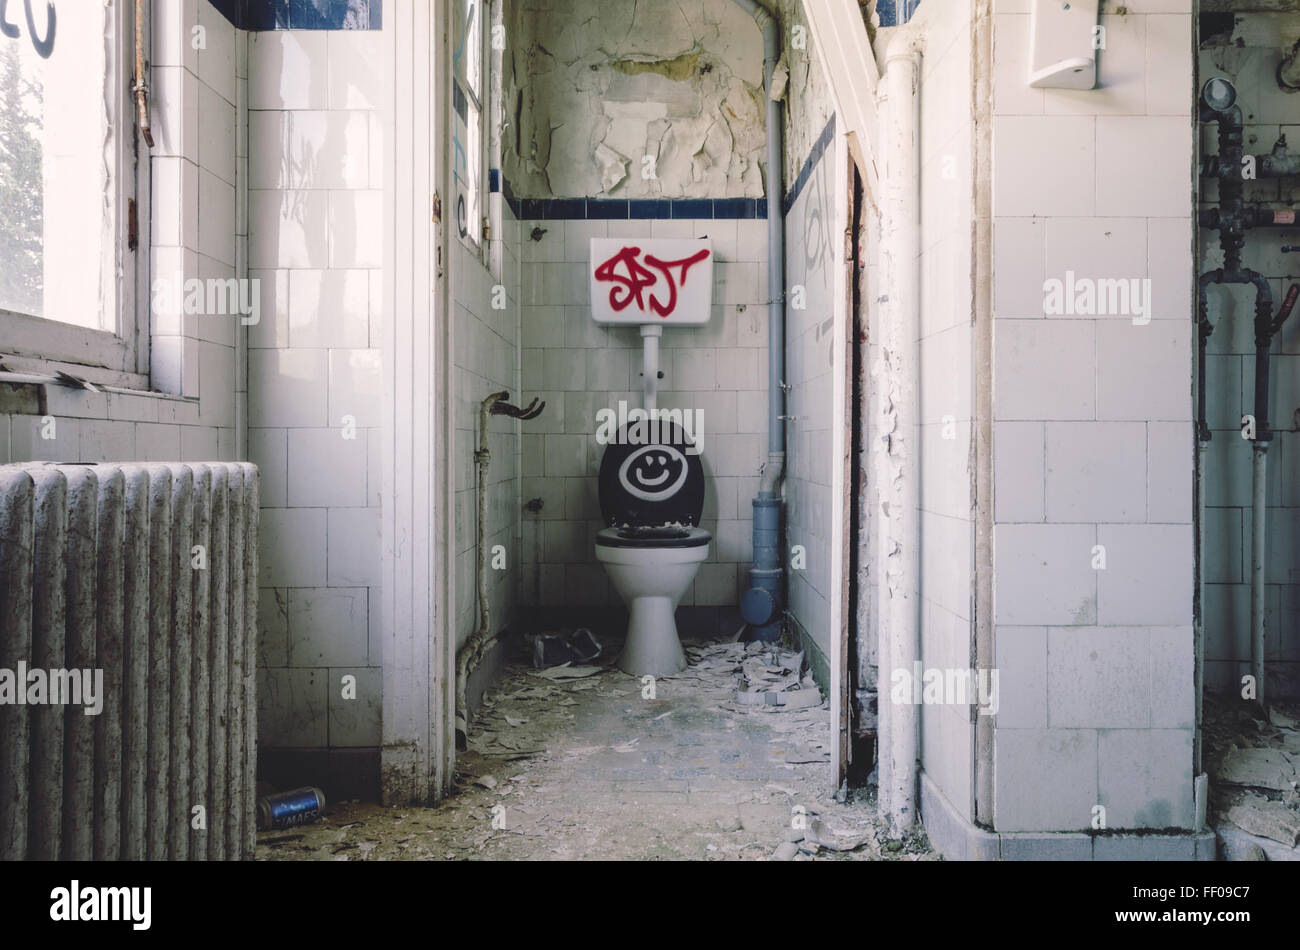 Toilet in Dilapidated Building Toilet in Dilapidated Building Stock Photo